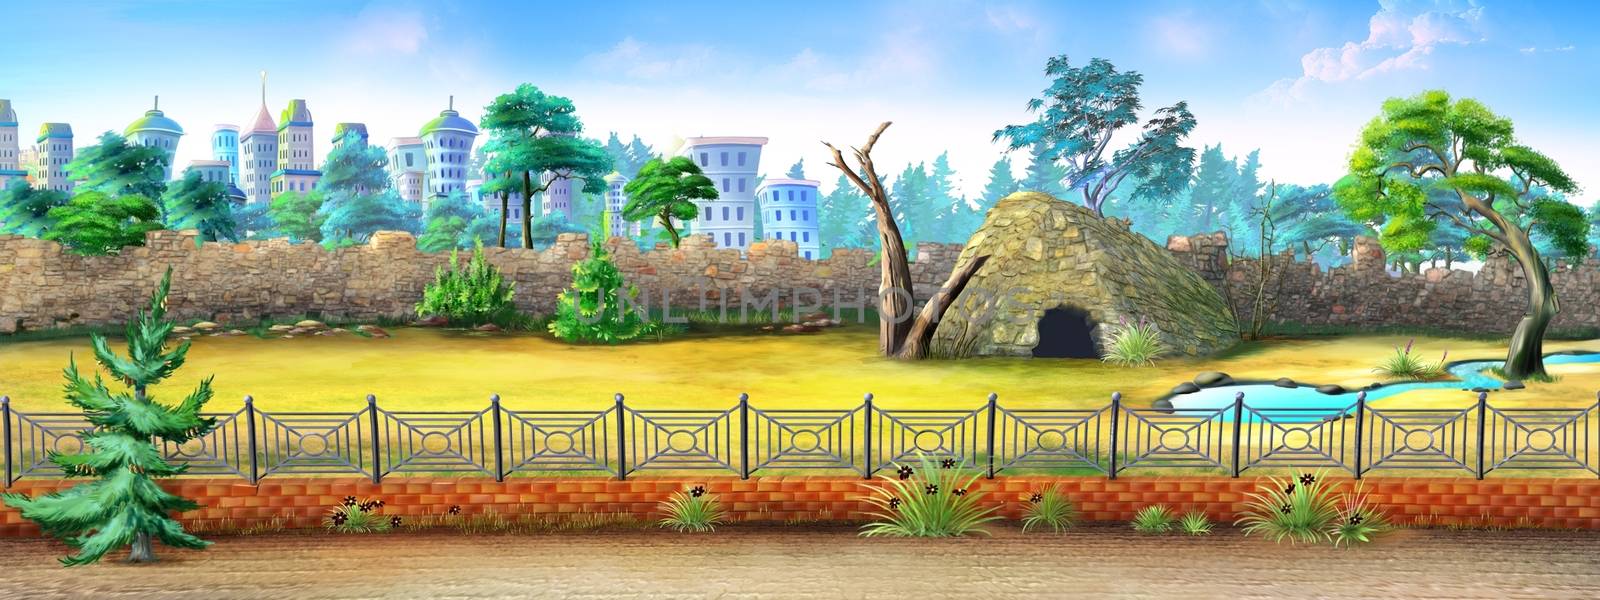 Digital painting of the City Zoo with fence, trees and small animal house.